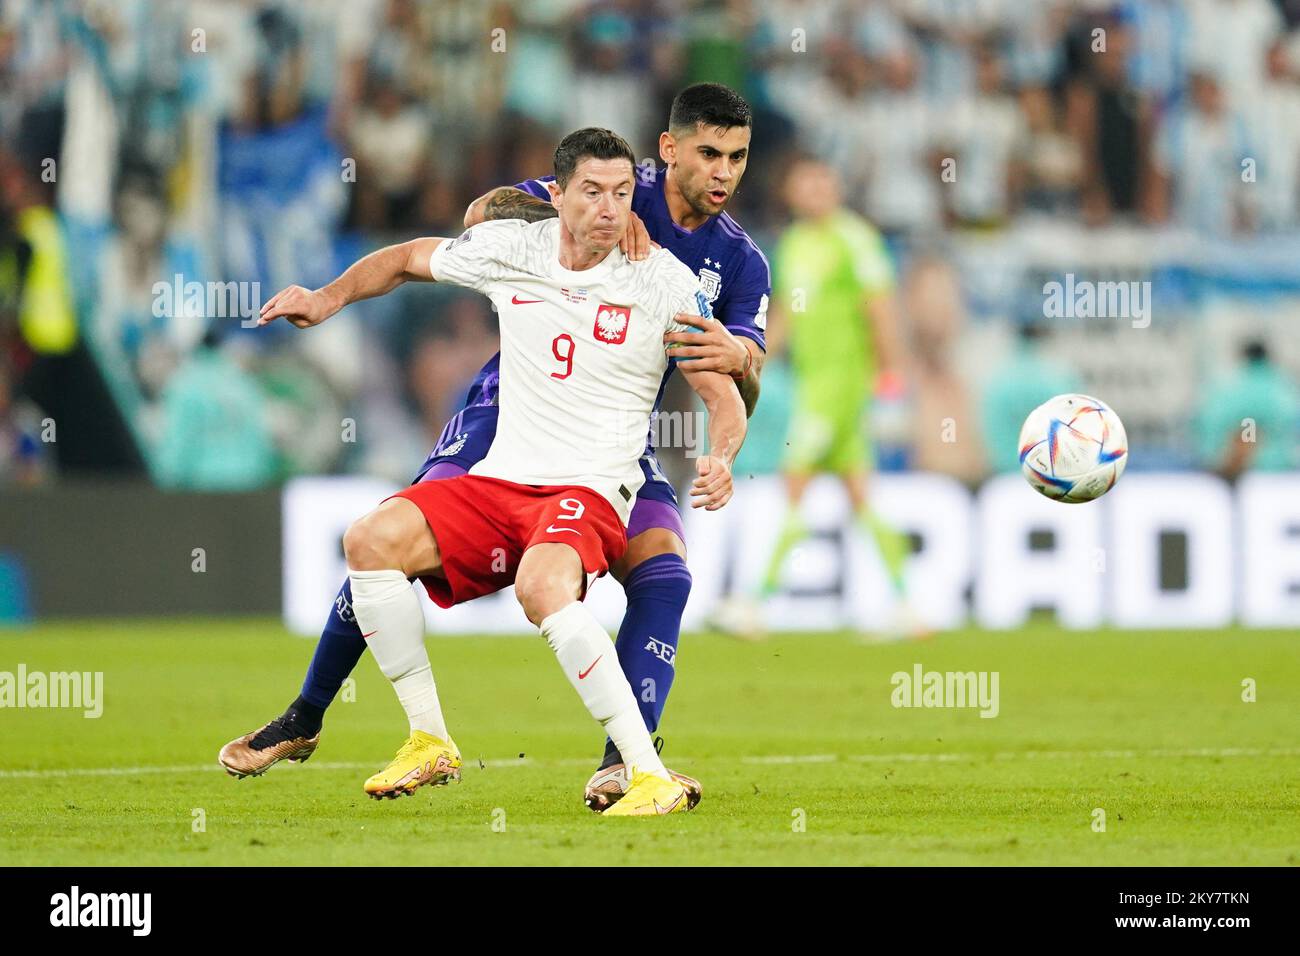 DOHA, QATAR - NOVEMBER 30: Player of Argentina Cristian Romero fights for the ball with player of Poland Robert Lewandowski during the FIFA World Cup Qatar 2022 group C match between Argentina and Poland at Stadium 974 on November 30, 2022 in Doha, Qatar. (Photo by Florencia Tan Jun/PxImages) Credit: Px Images/Alamy Live News Stock Photo